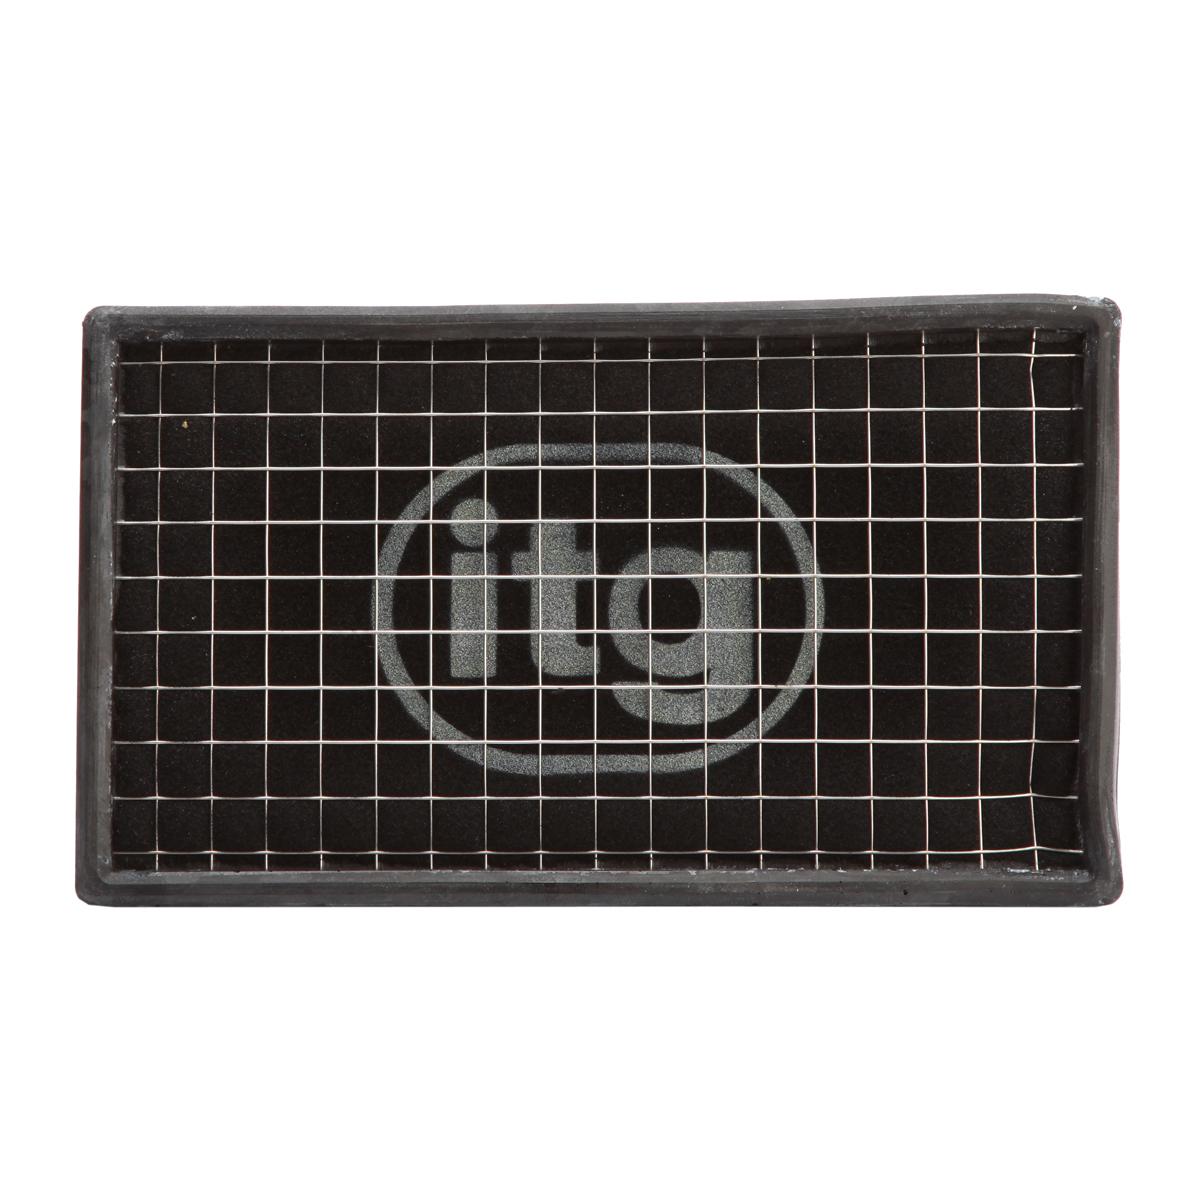 ITG Air Filter For BMW 318I E46 1.8 Only (1998>)